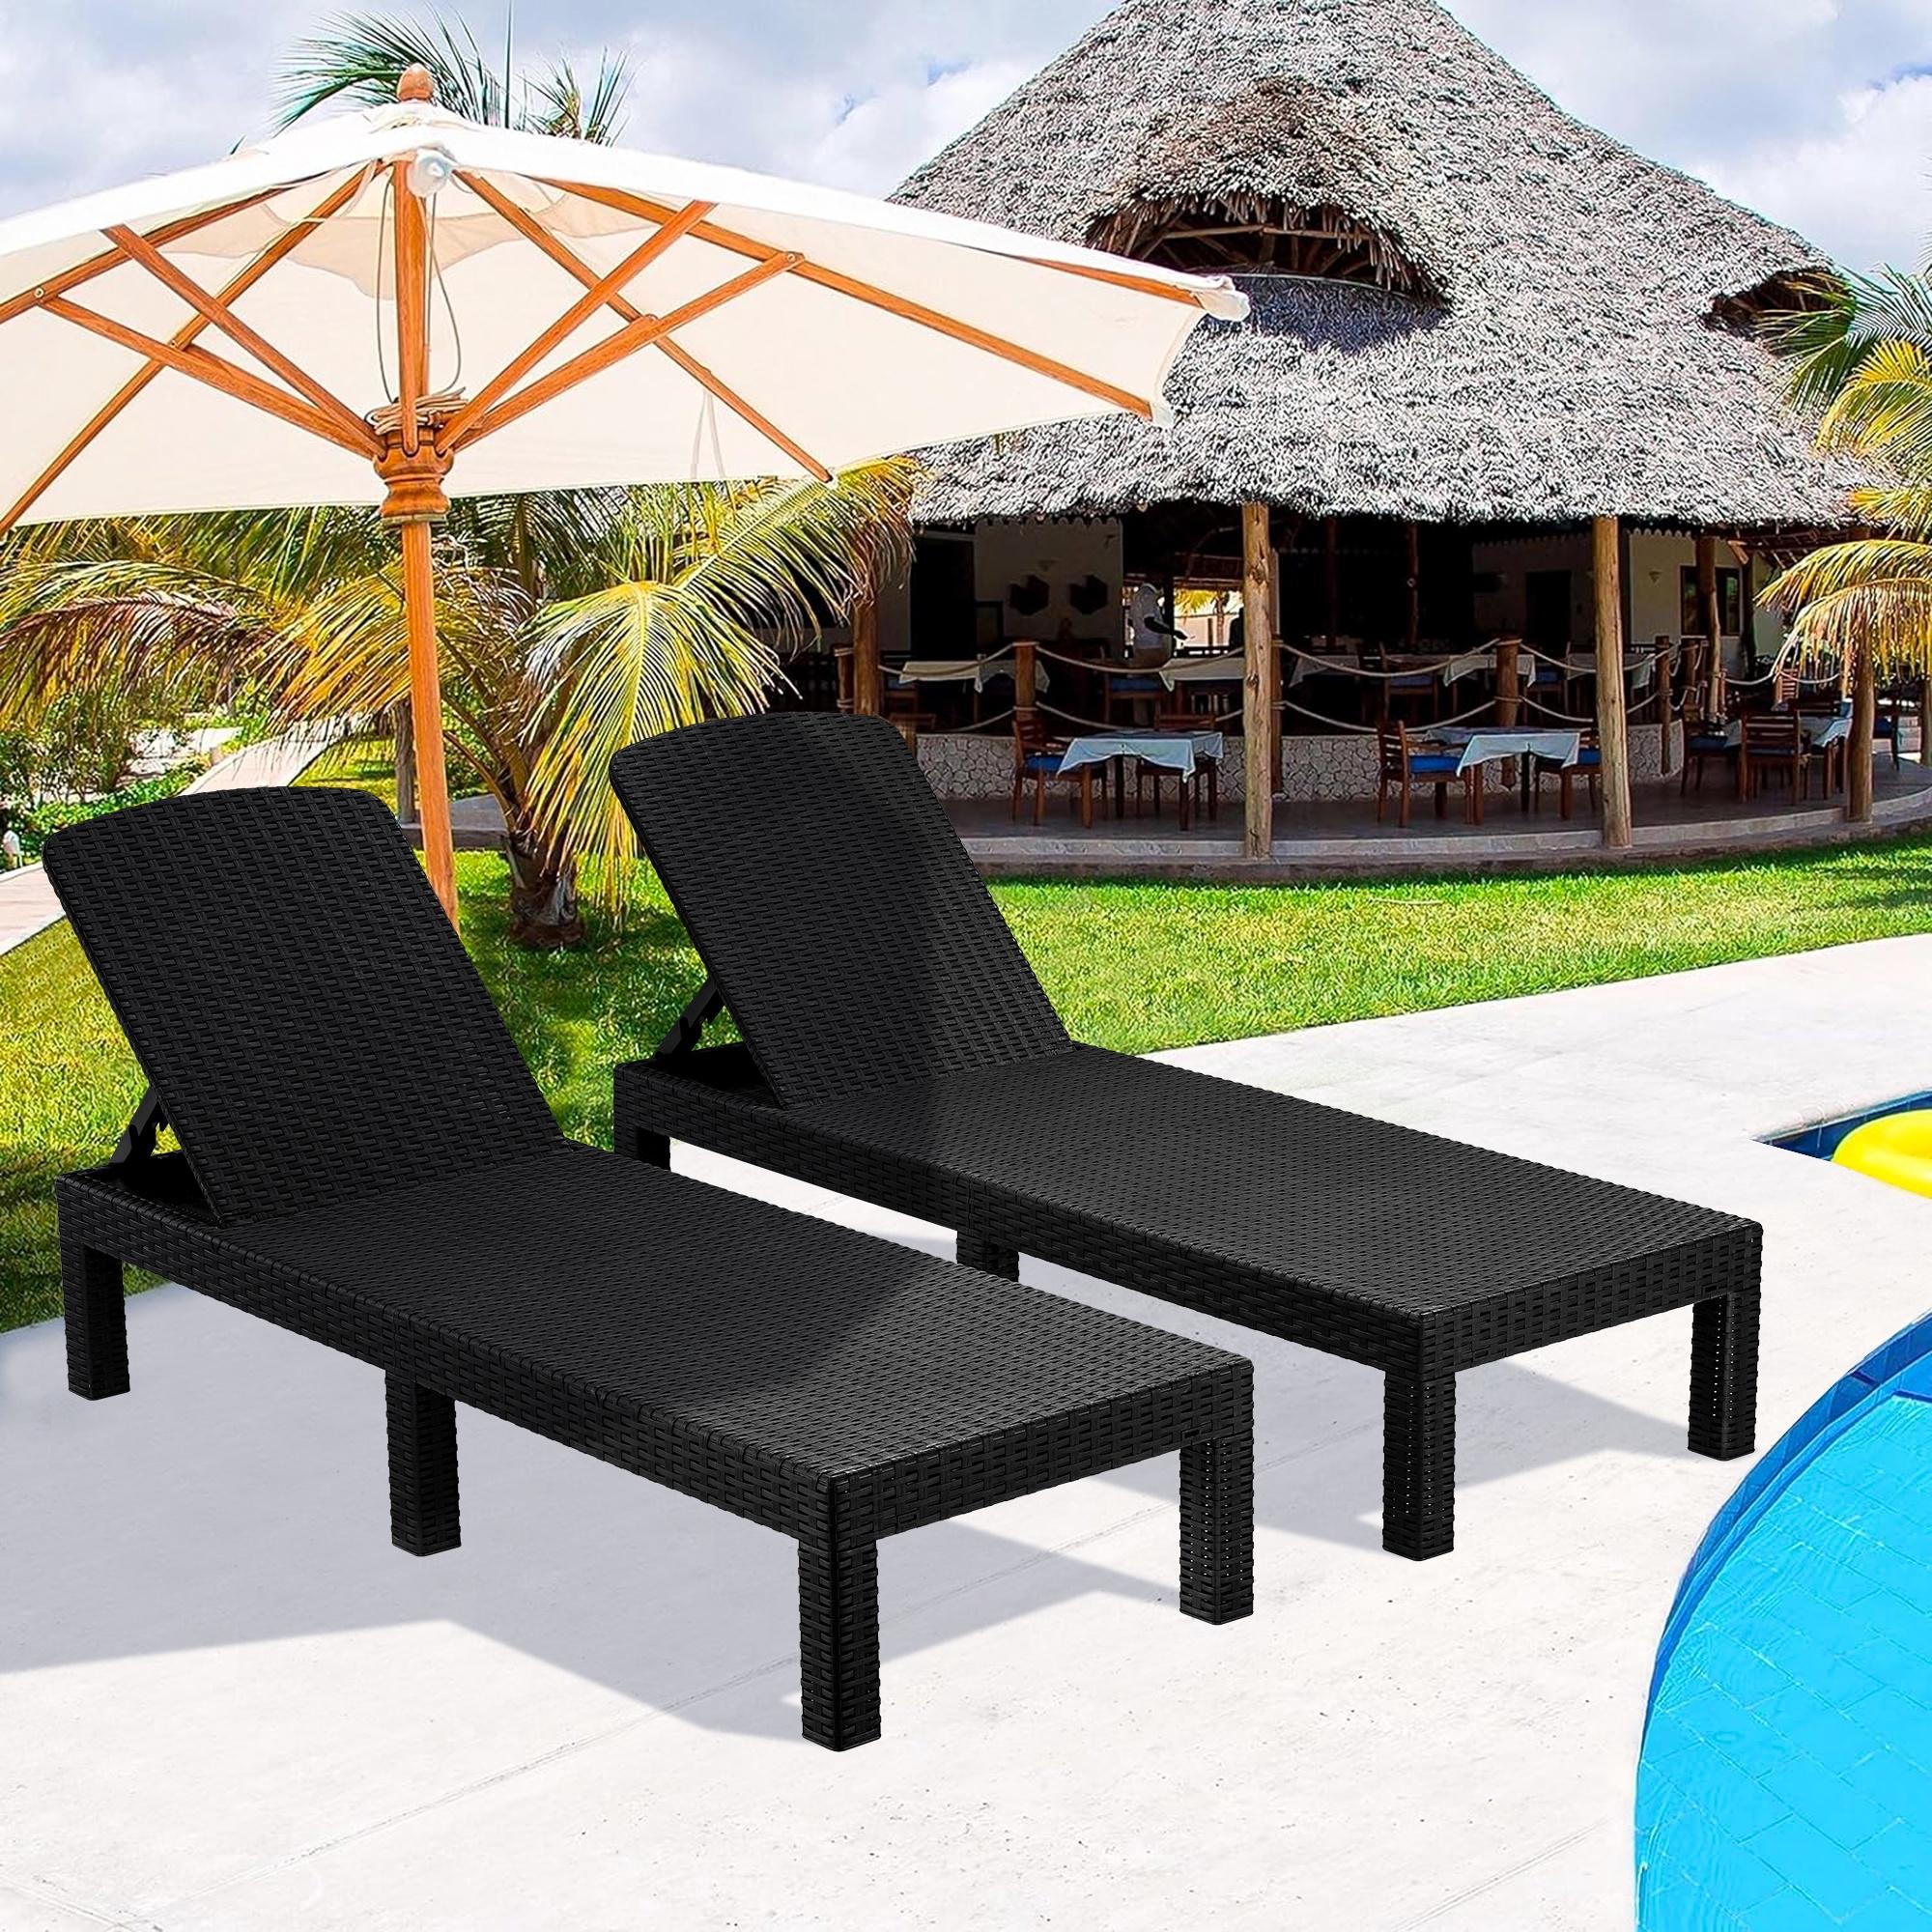 Syngar Chaise Lounge Set of 2, Patio Reclining Lounge Chairs with Adjustable Backrest, Outdoor All-Weather PP Resin Sun Loungers for Backyard, Poolside, Porch, Garden, Black - image 3 of 10